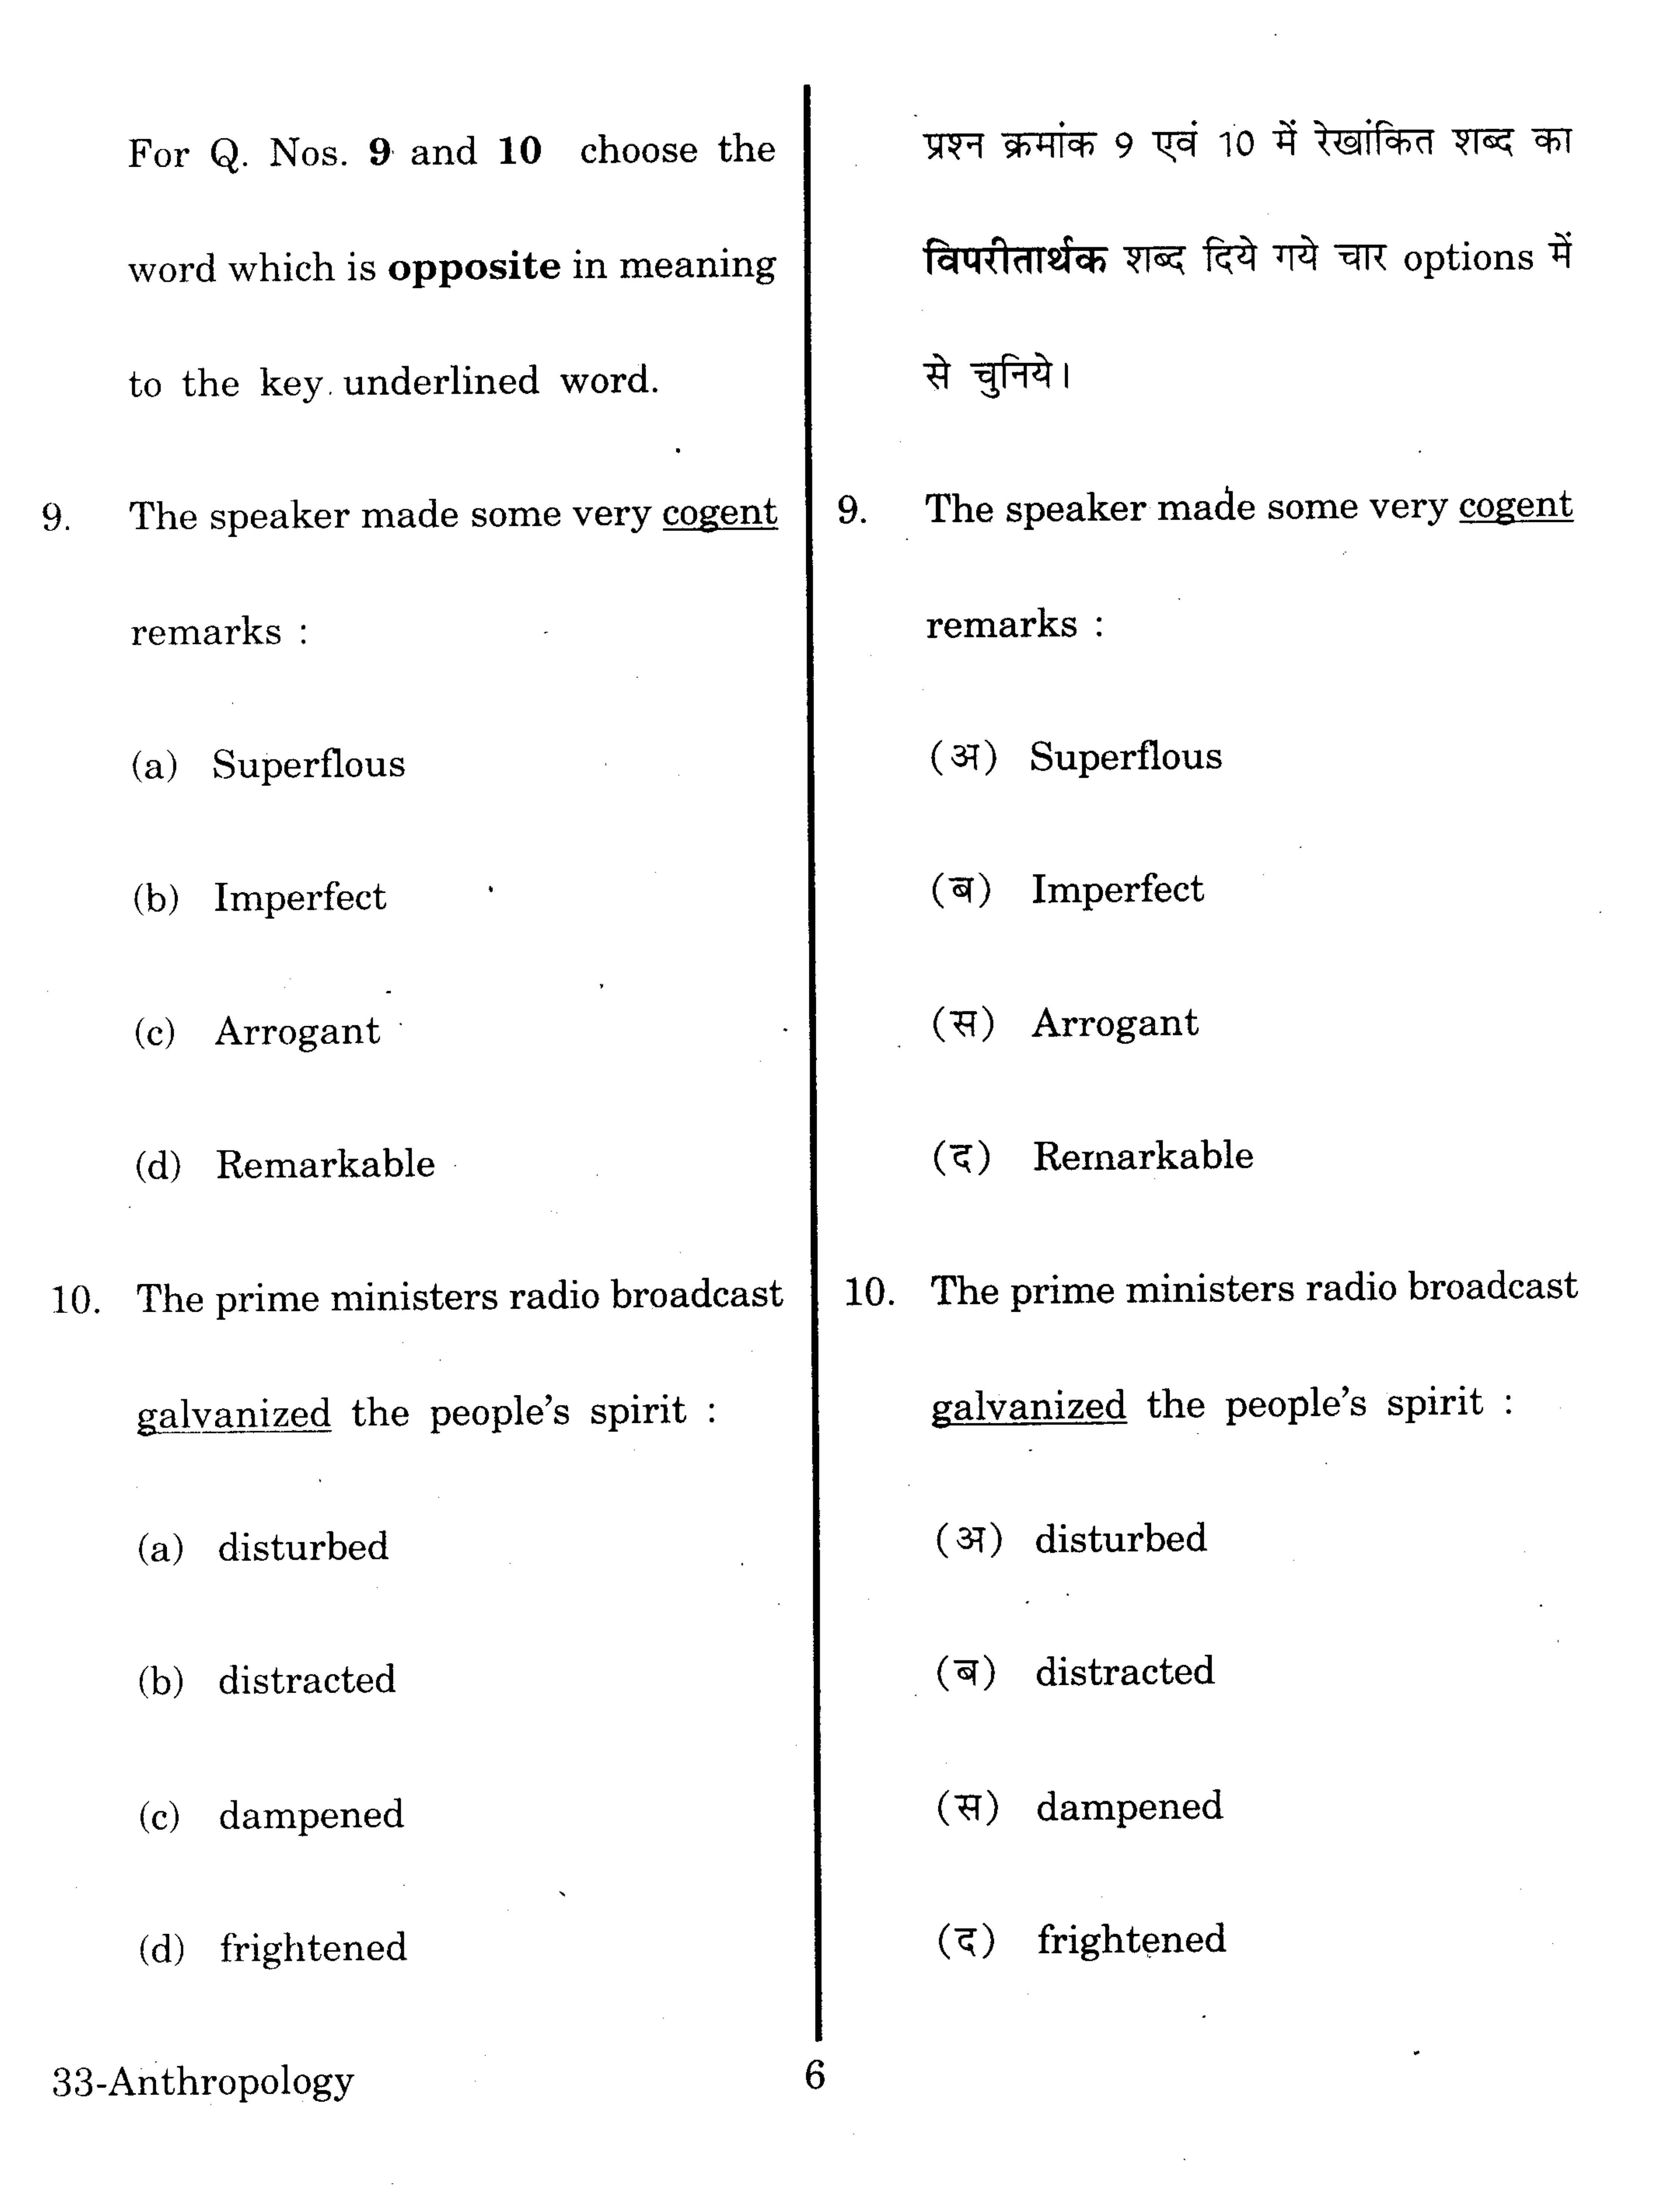 URATPG Anthropology 2013 Question Paper - Page 6